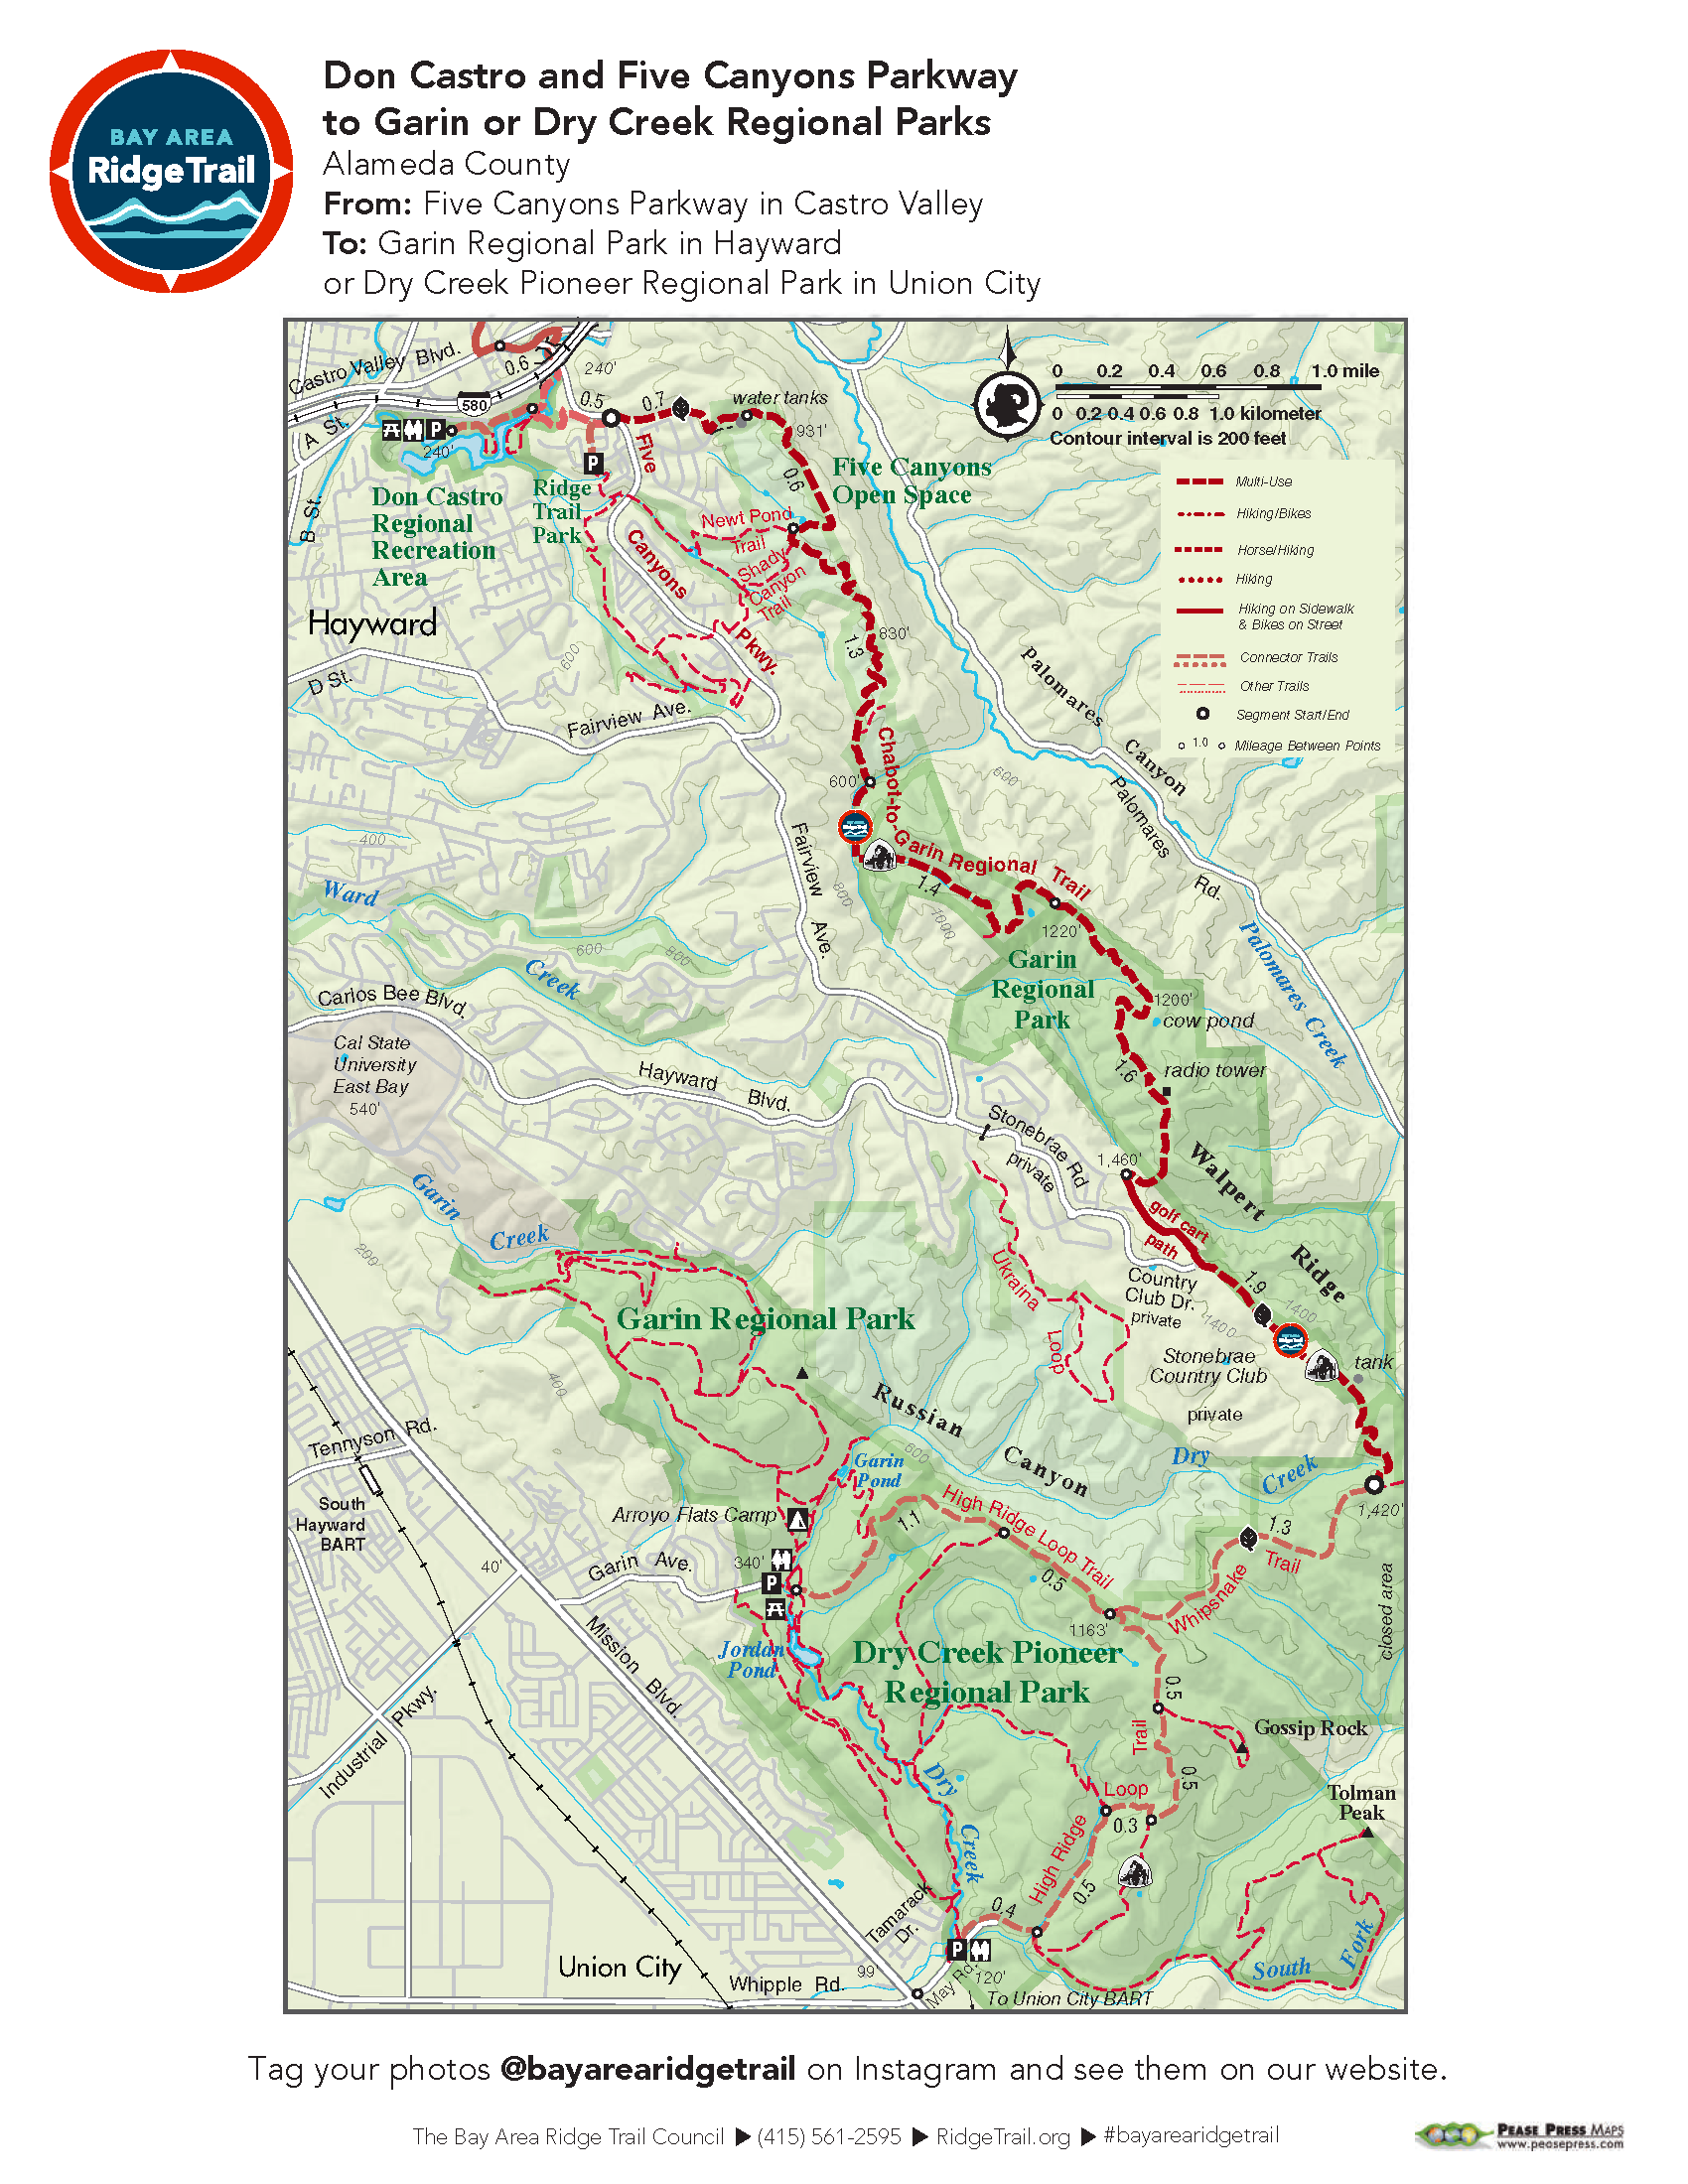 Don Castro and Five Canyons Parkway to Garin or Dry Creek Regional Parks